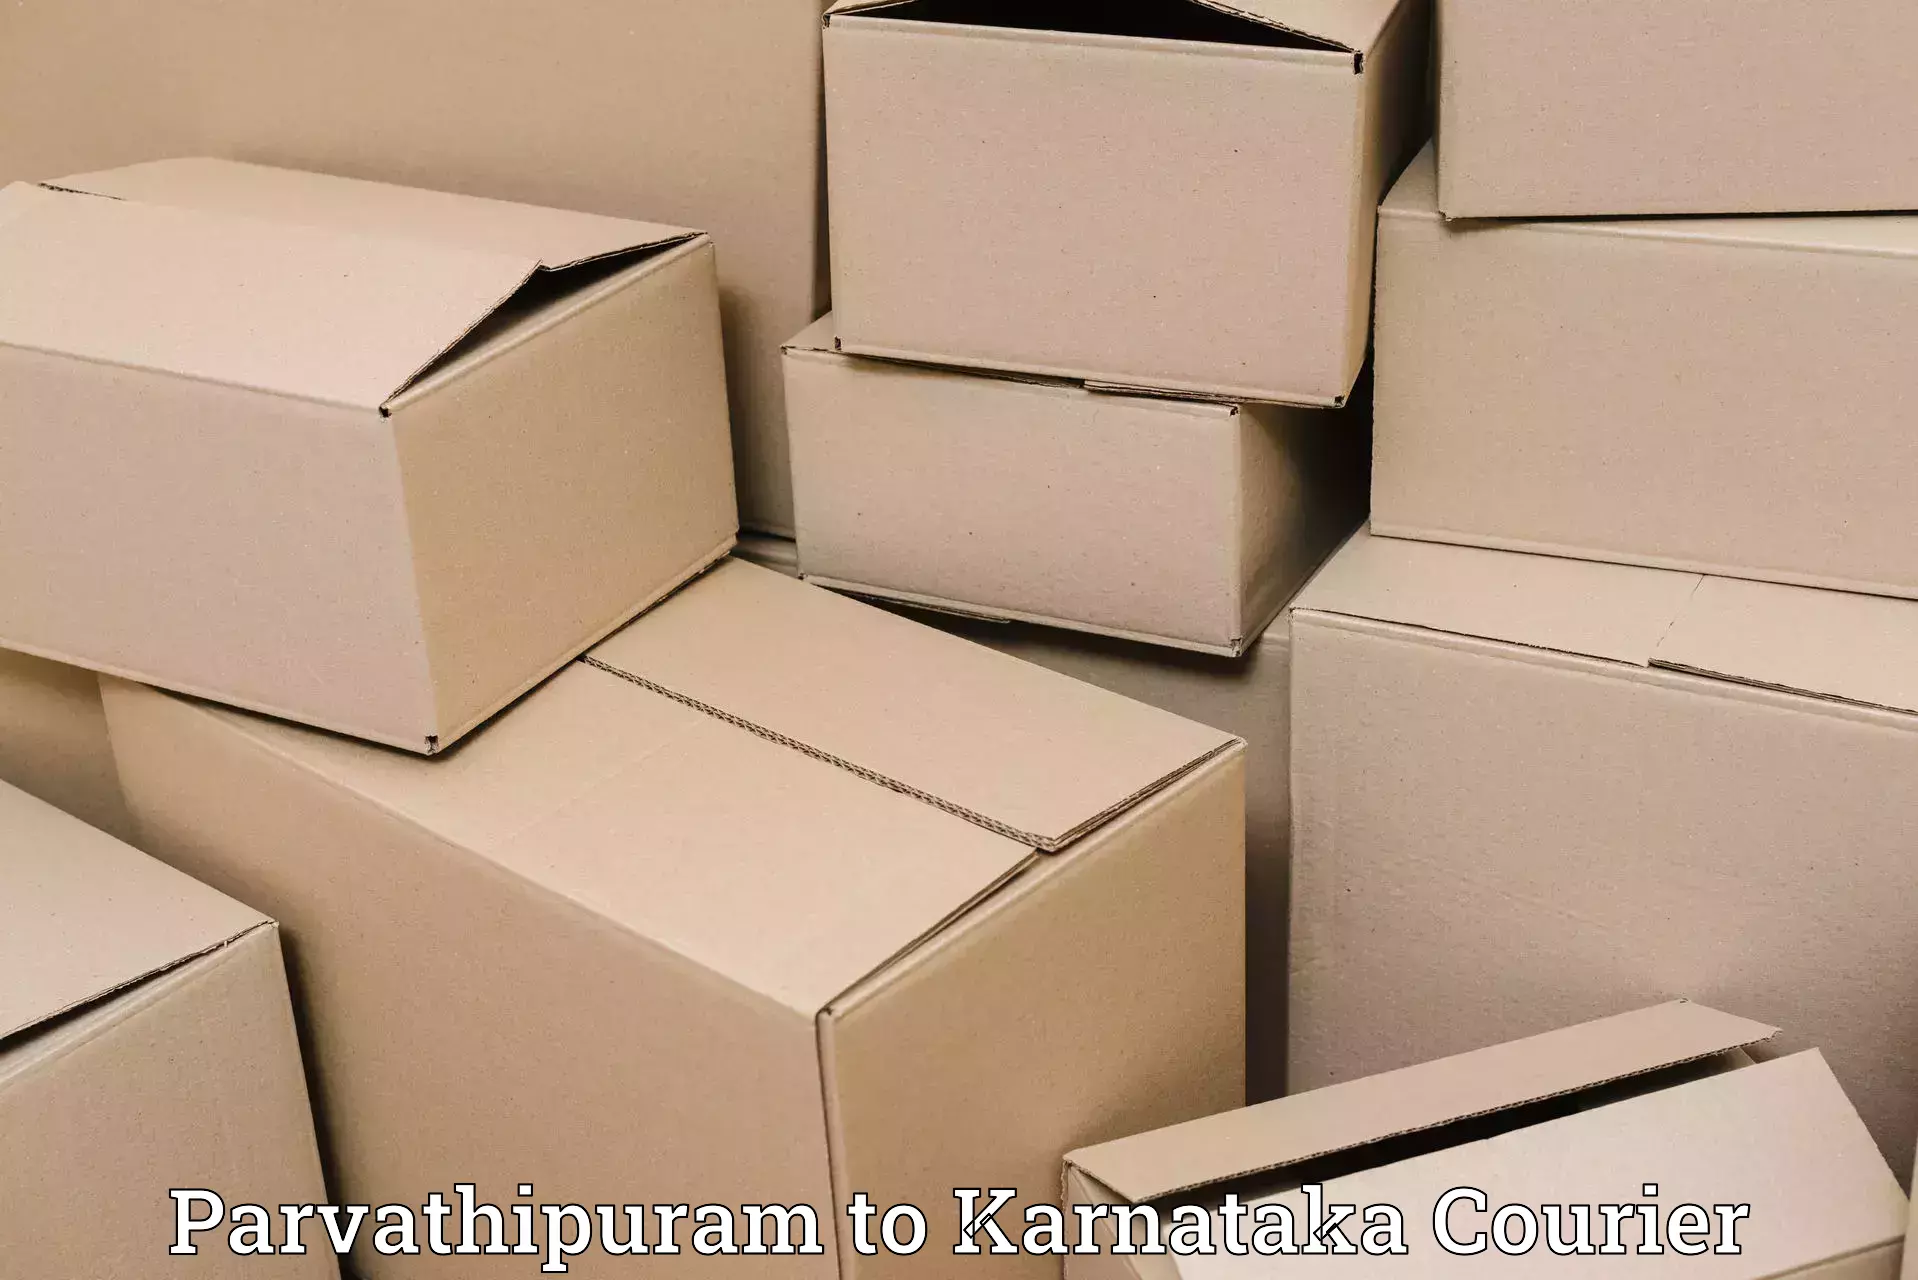 Advanced shipping network Parvathipuram to Sirsi